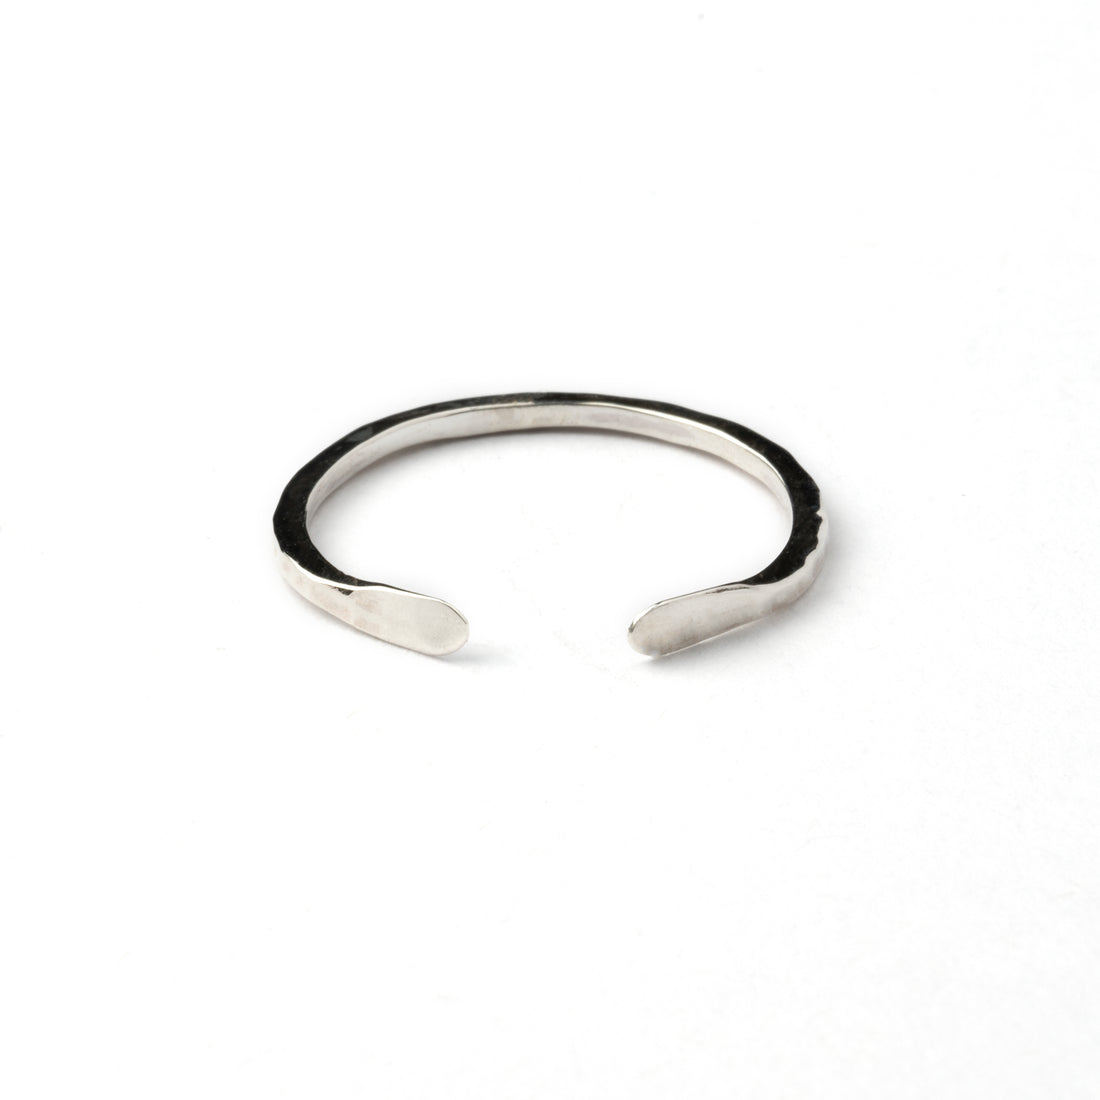 Hammered silver thin adjustable open band ring frontal view